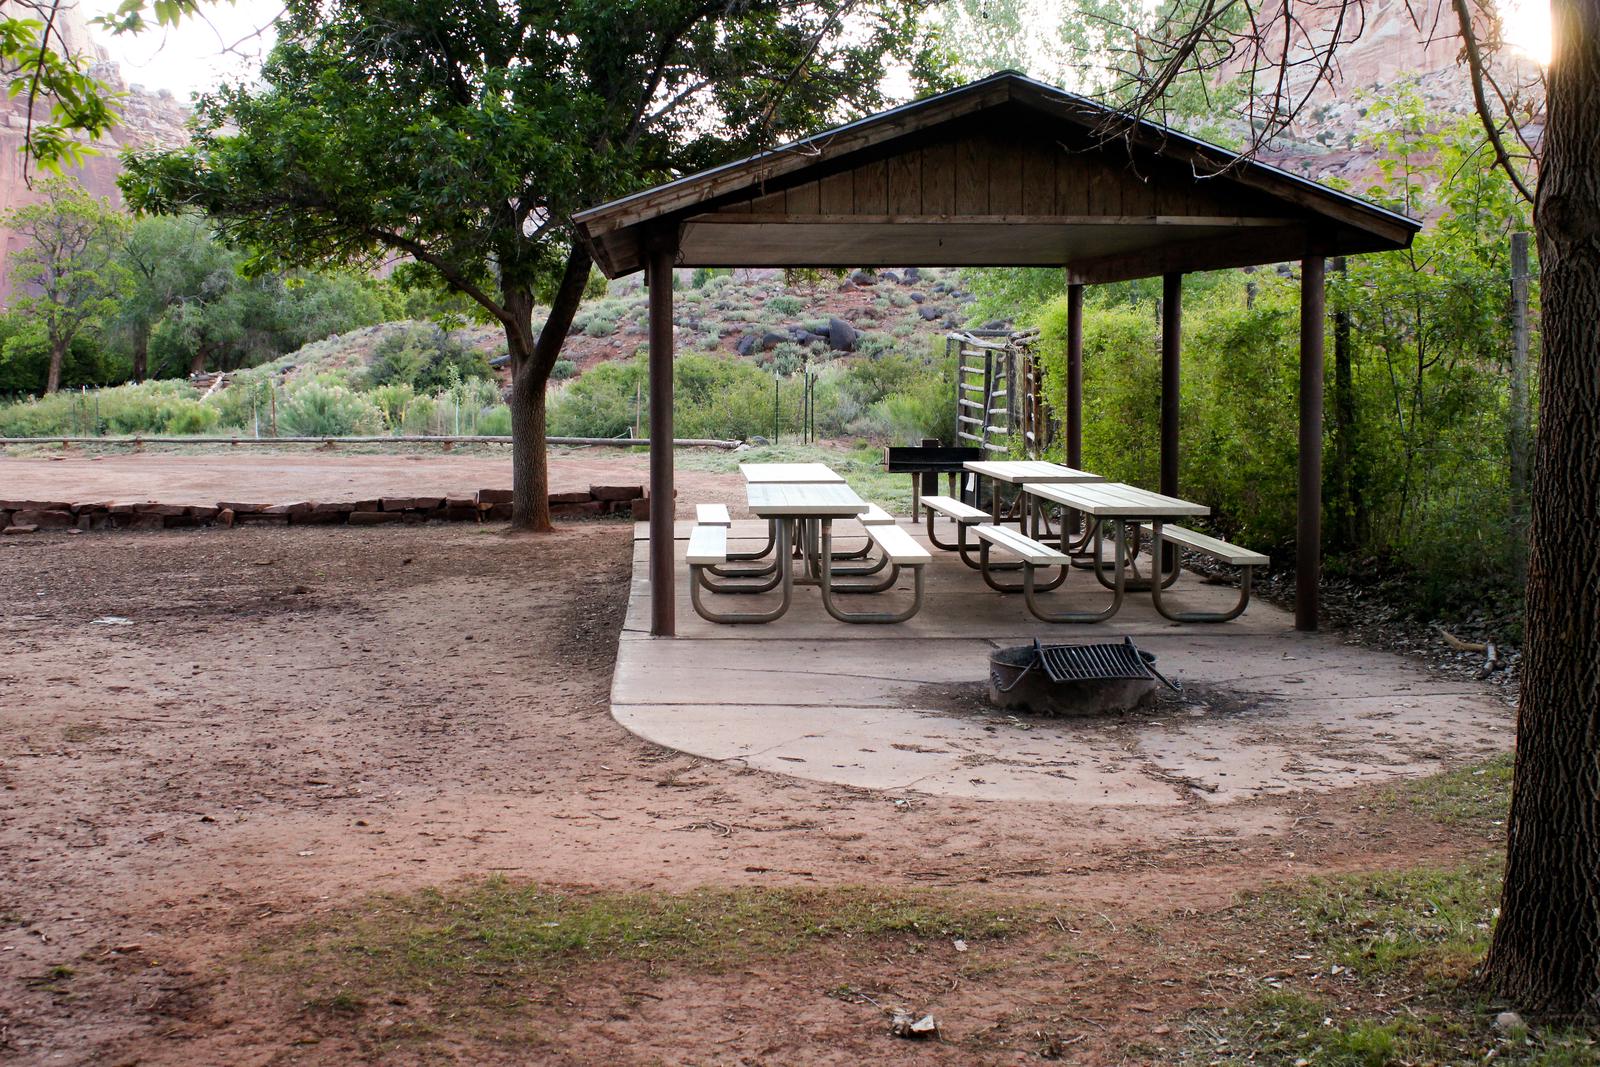 A pavilion covers four white picnic tables on pavement. There is a fire pit to the right of the pavilion, still on pavement. The pavilion backs up to foliage. A patch of dirt is in front of it and the fire pit Pavilion with Fire Pit